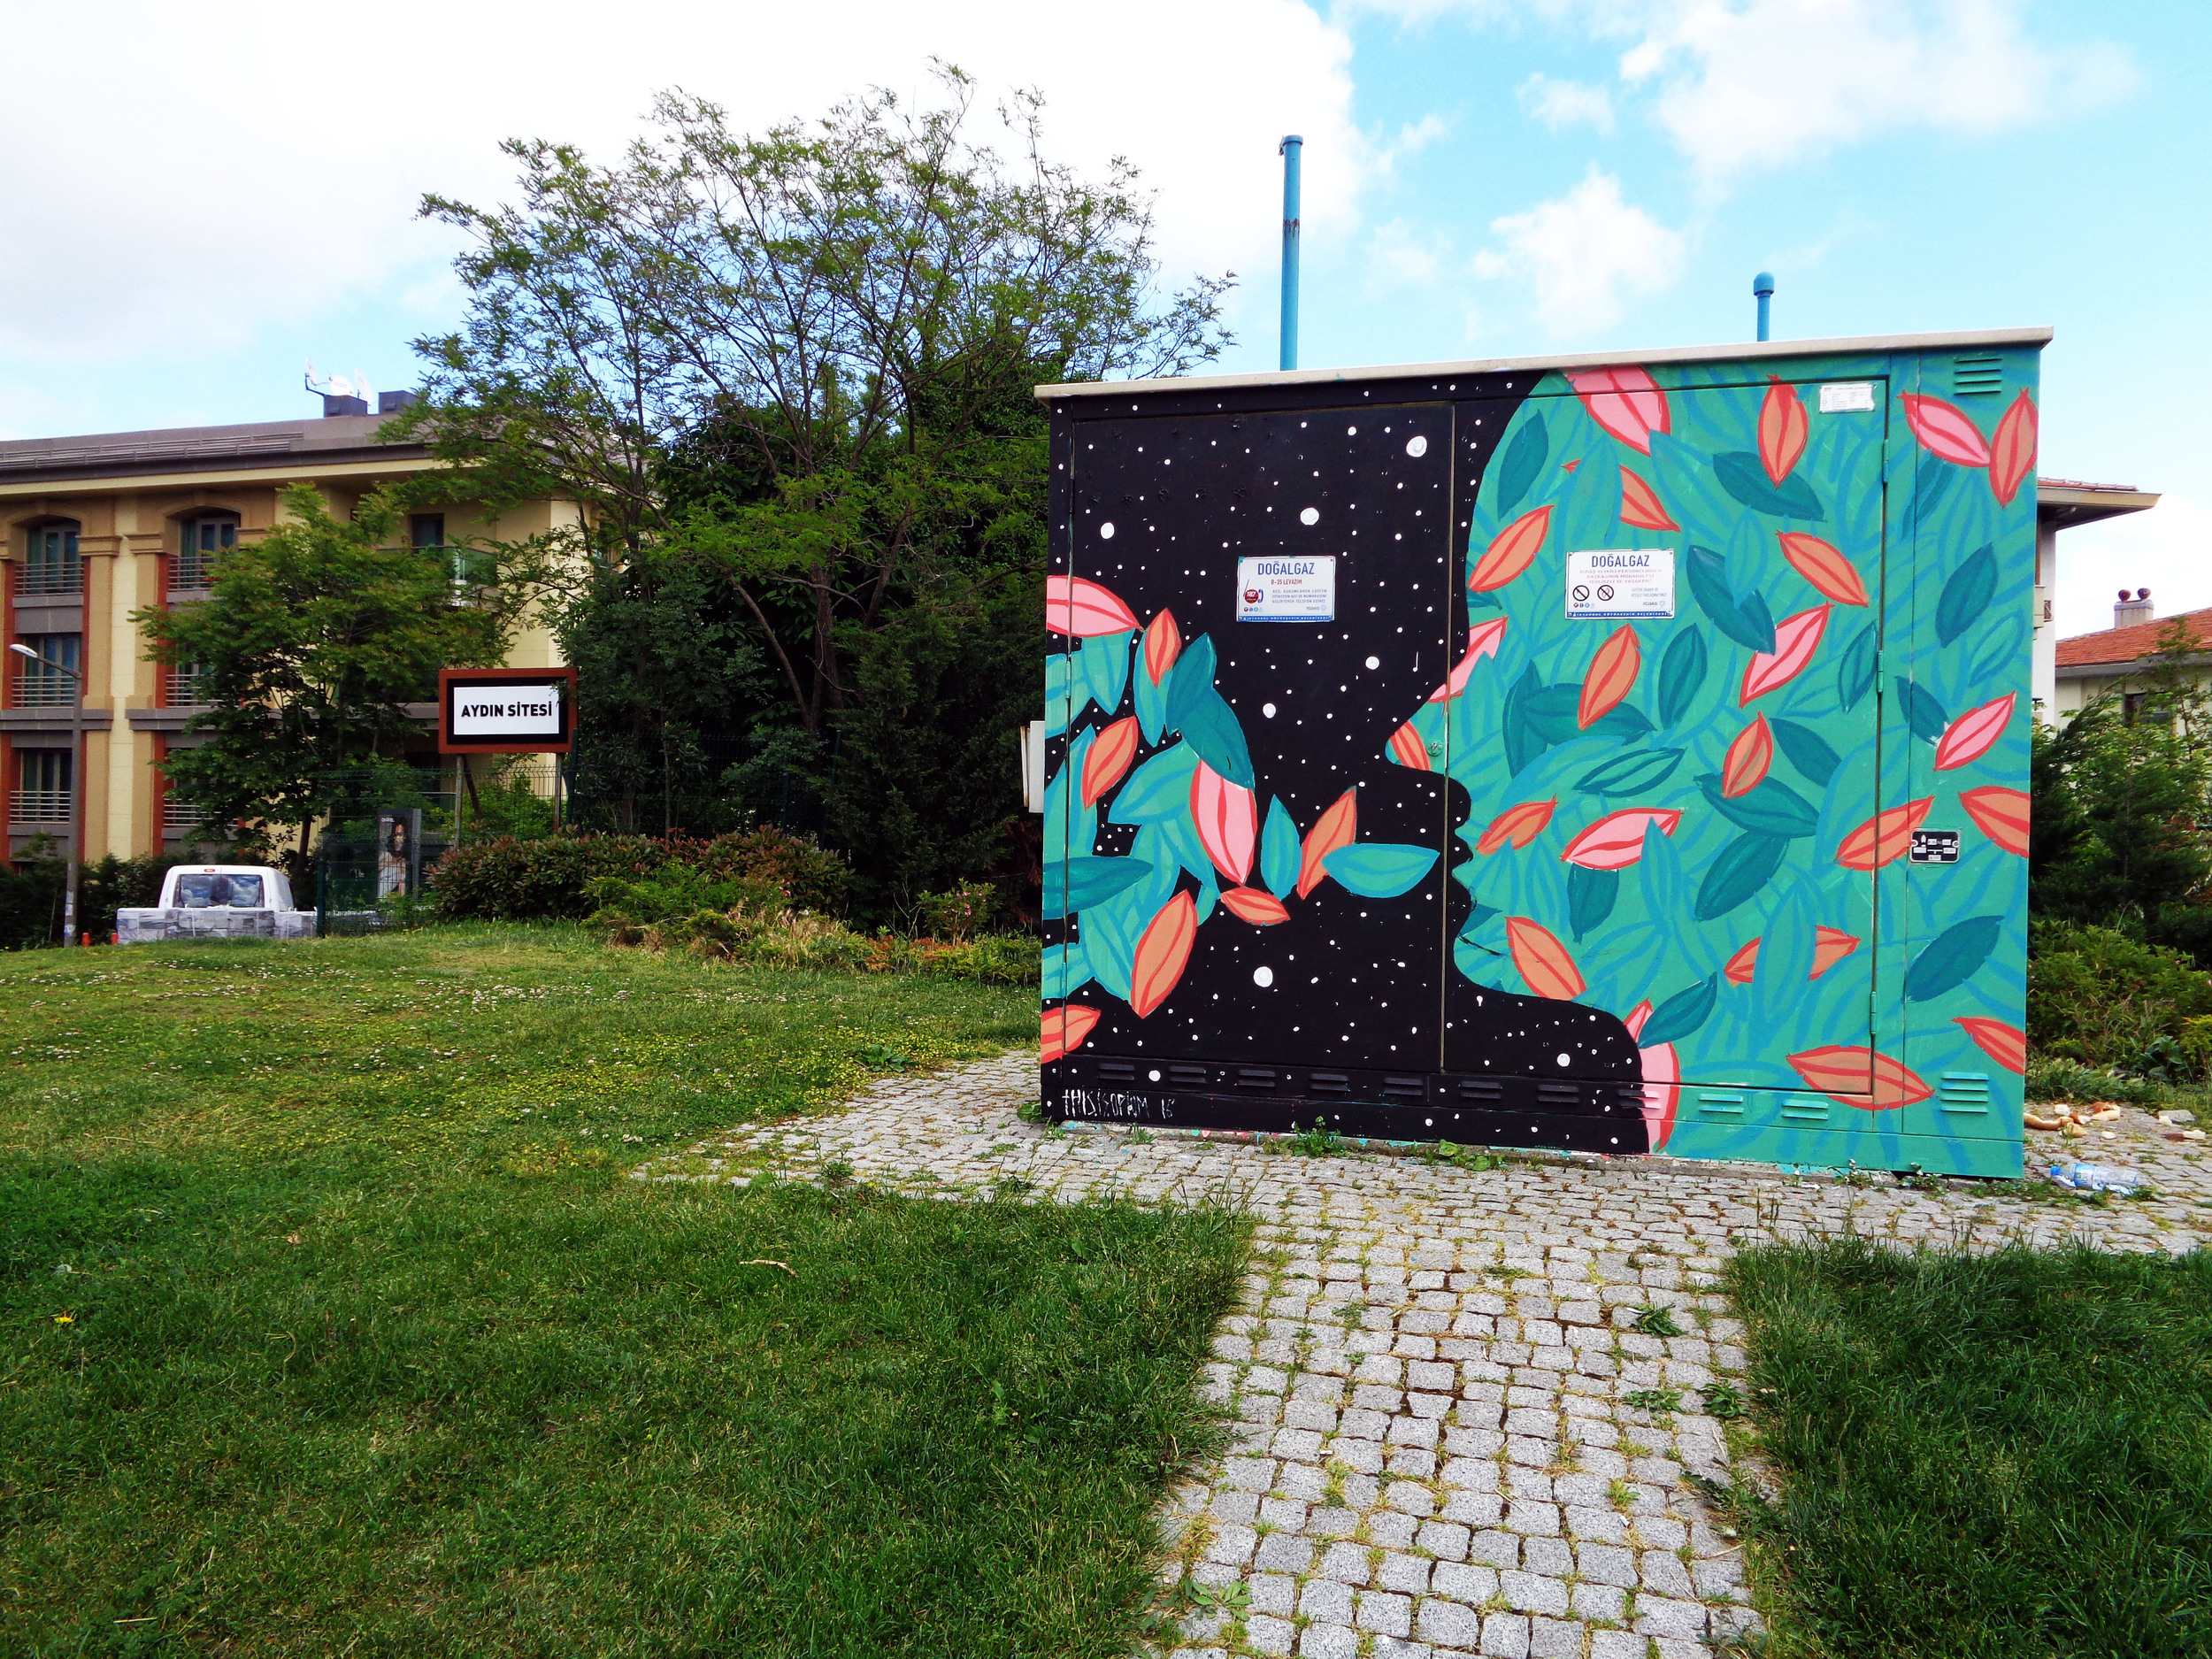  Mural commissioned by Besiktas international festival, Istanbul 2016 